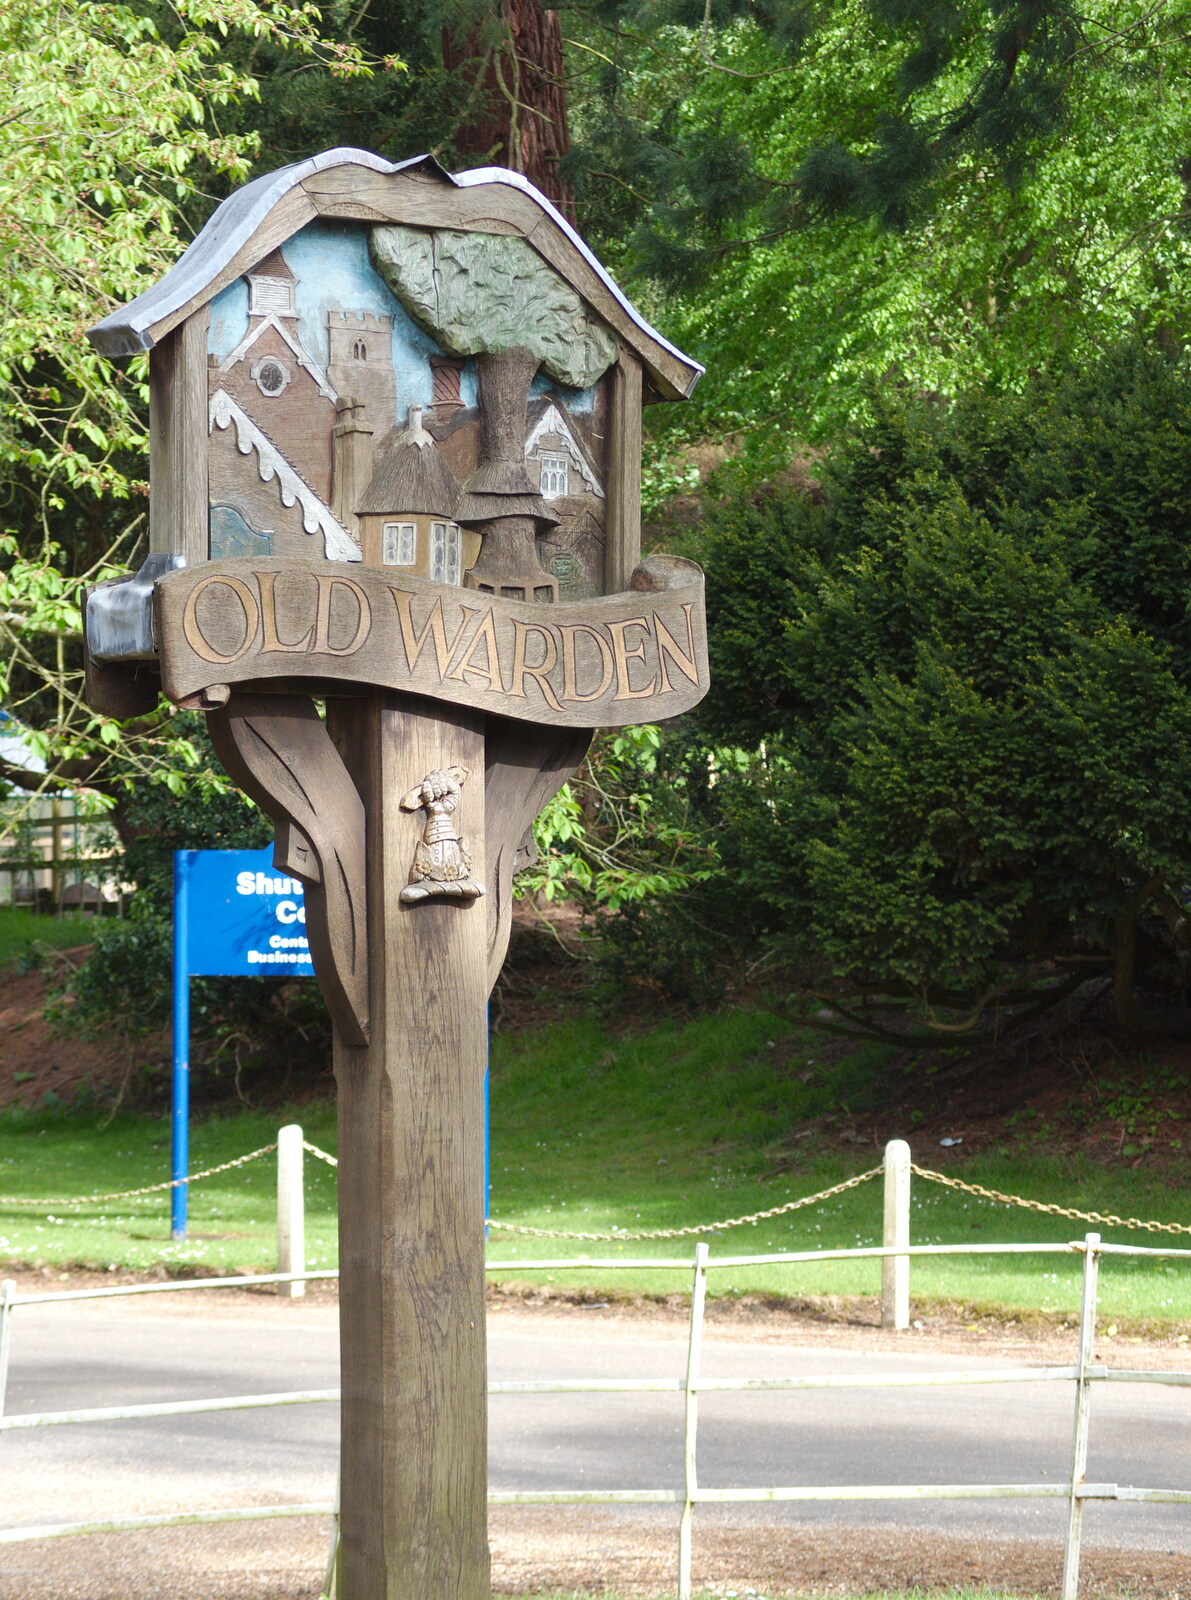 The Old Warden village sign from A Return to Bedford: the BSCC Annual Weekend Away, Shefford, Bedfordshire - 10th May 2014